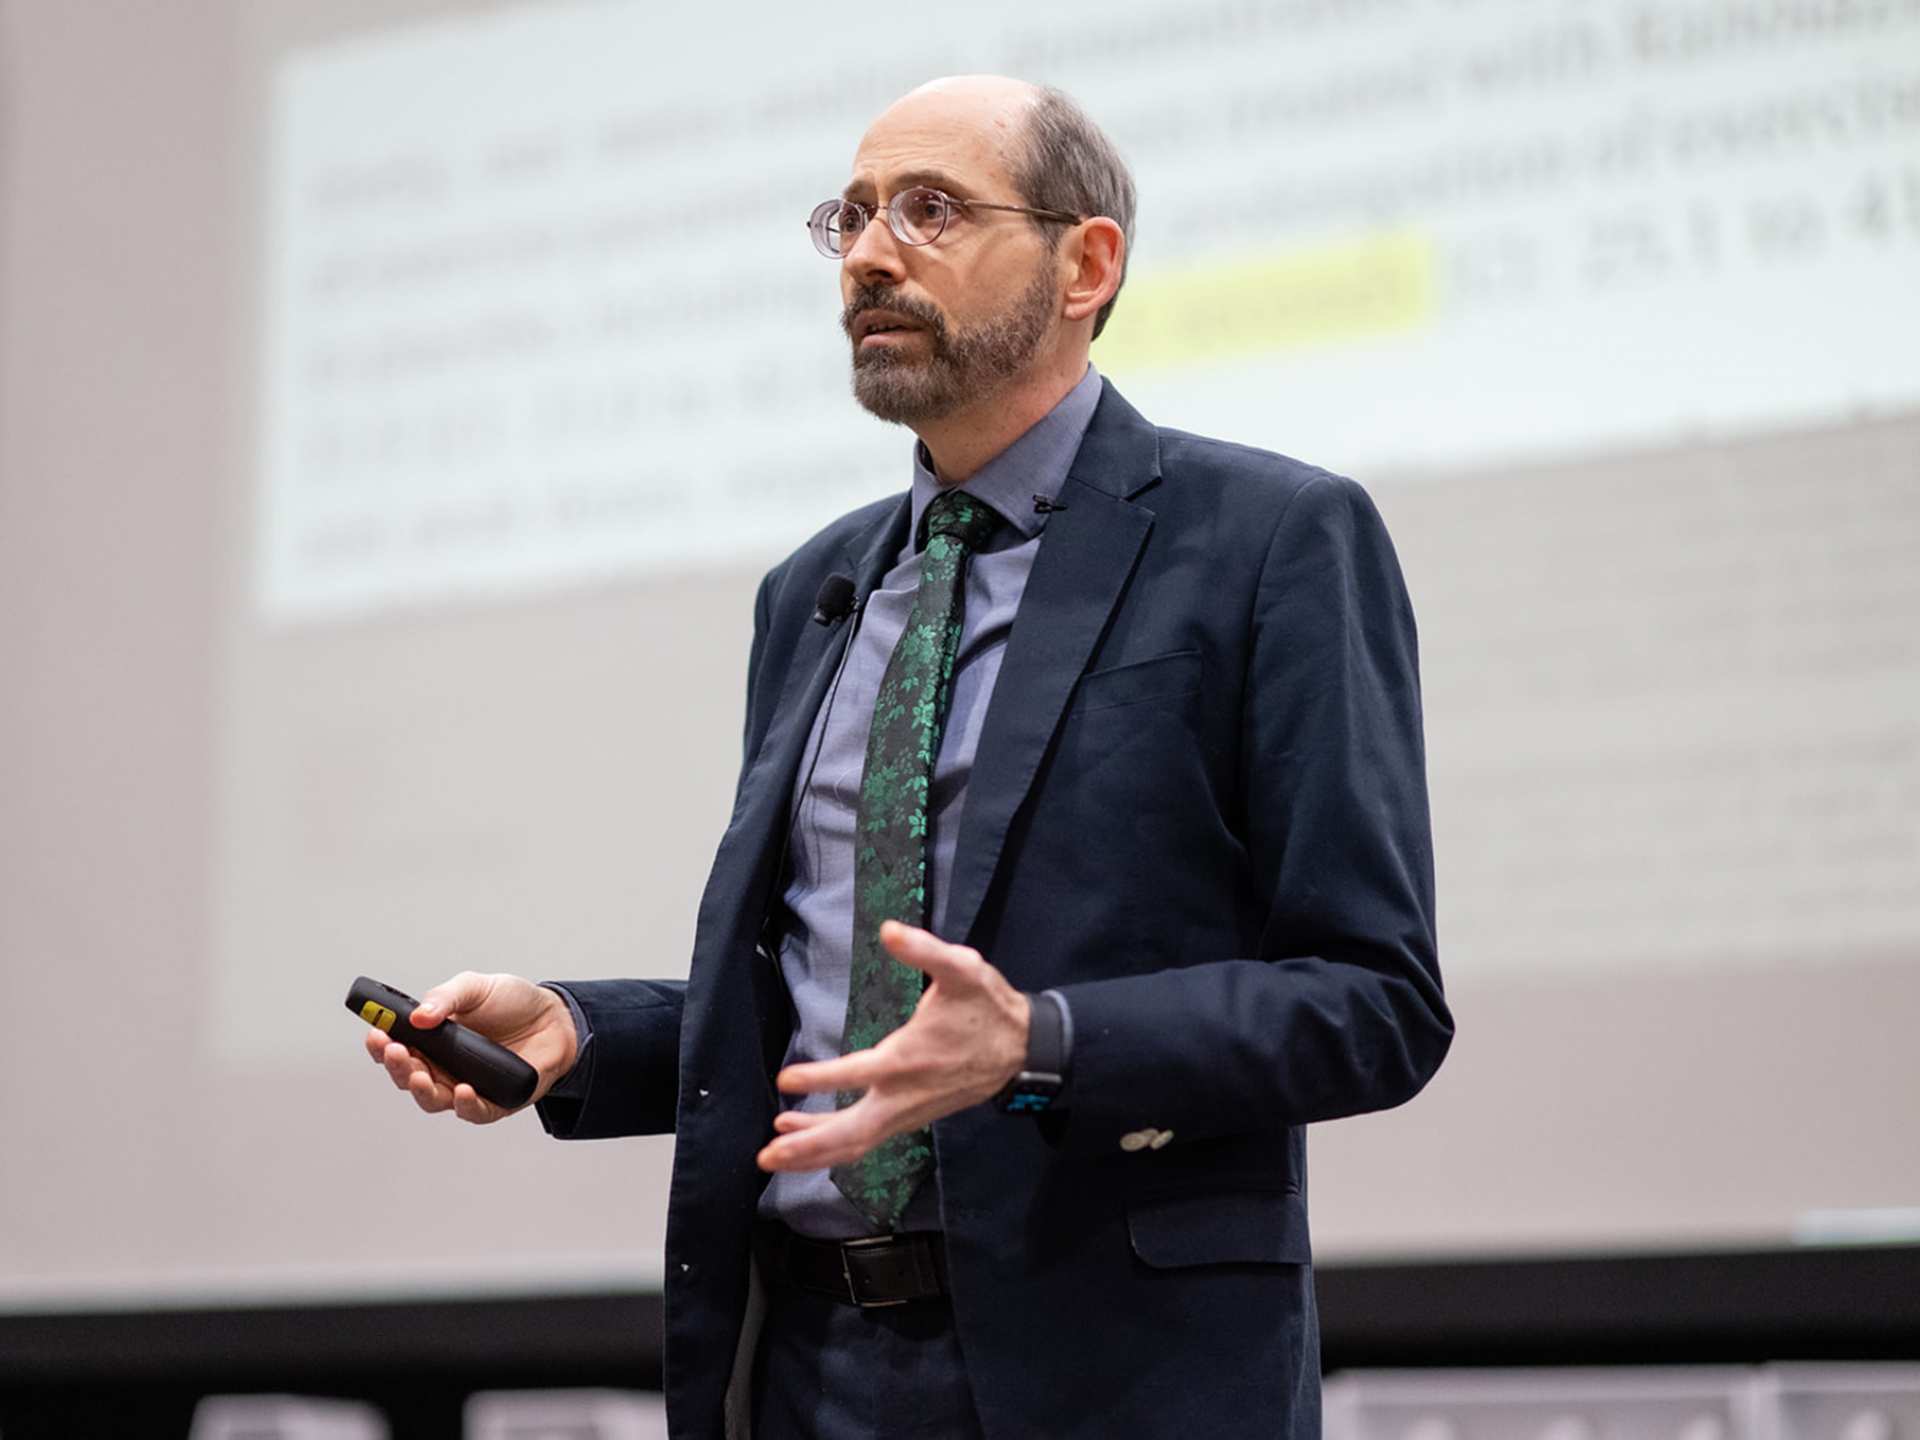 Dr. Michael Greger speaking at Planted Expo Toronto